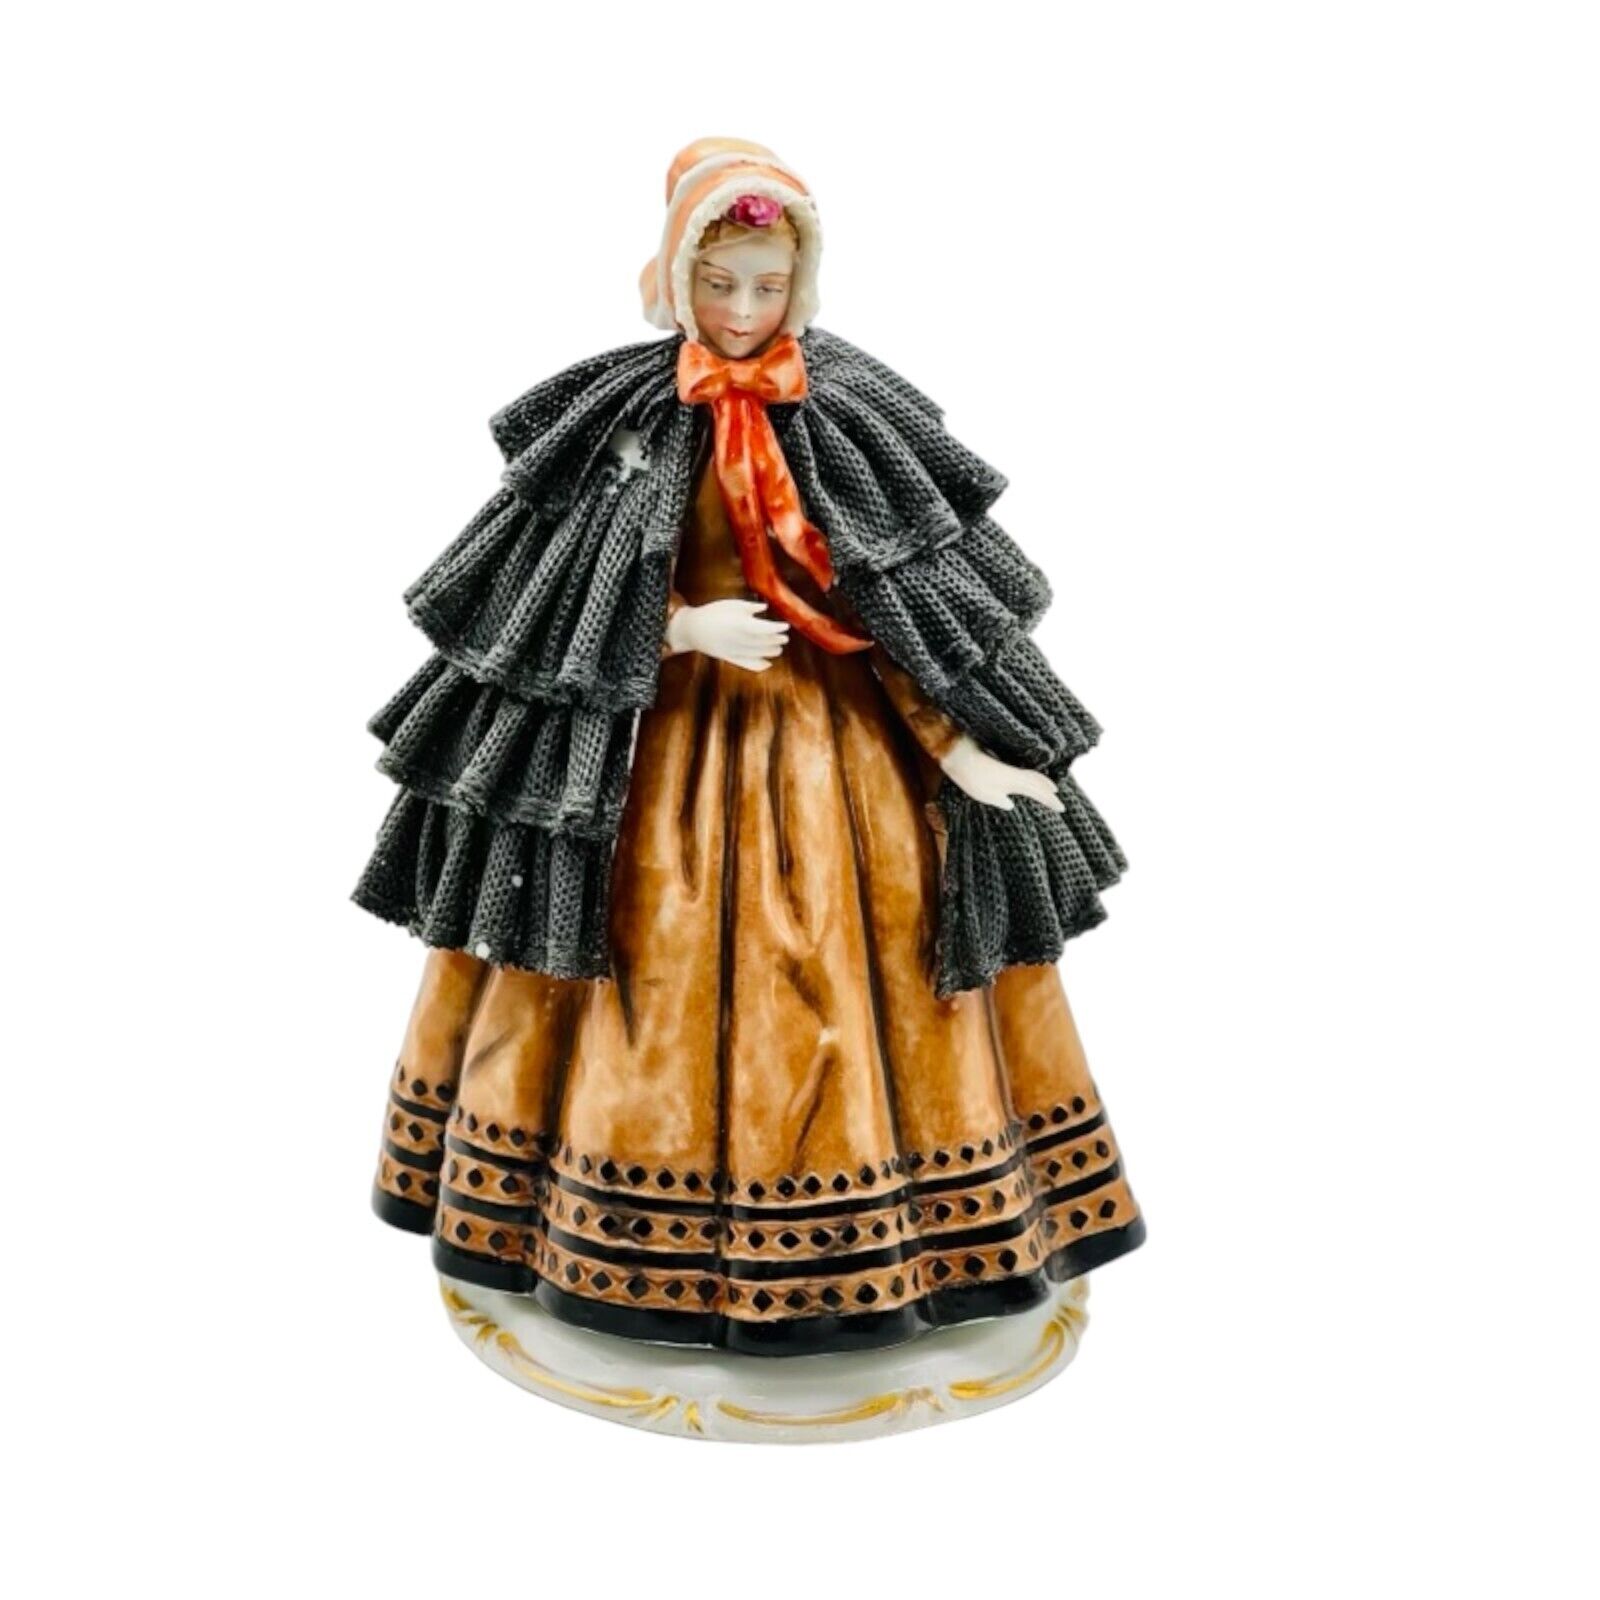 RARE  VTG 1863 Sitzendorf Dresden Lace Figurine GODEY'S FASHIONS AS IS SEE PICS